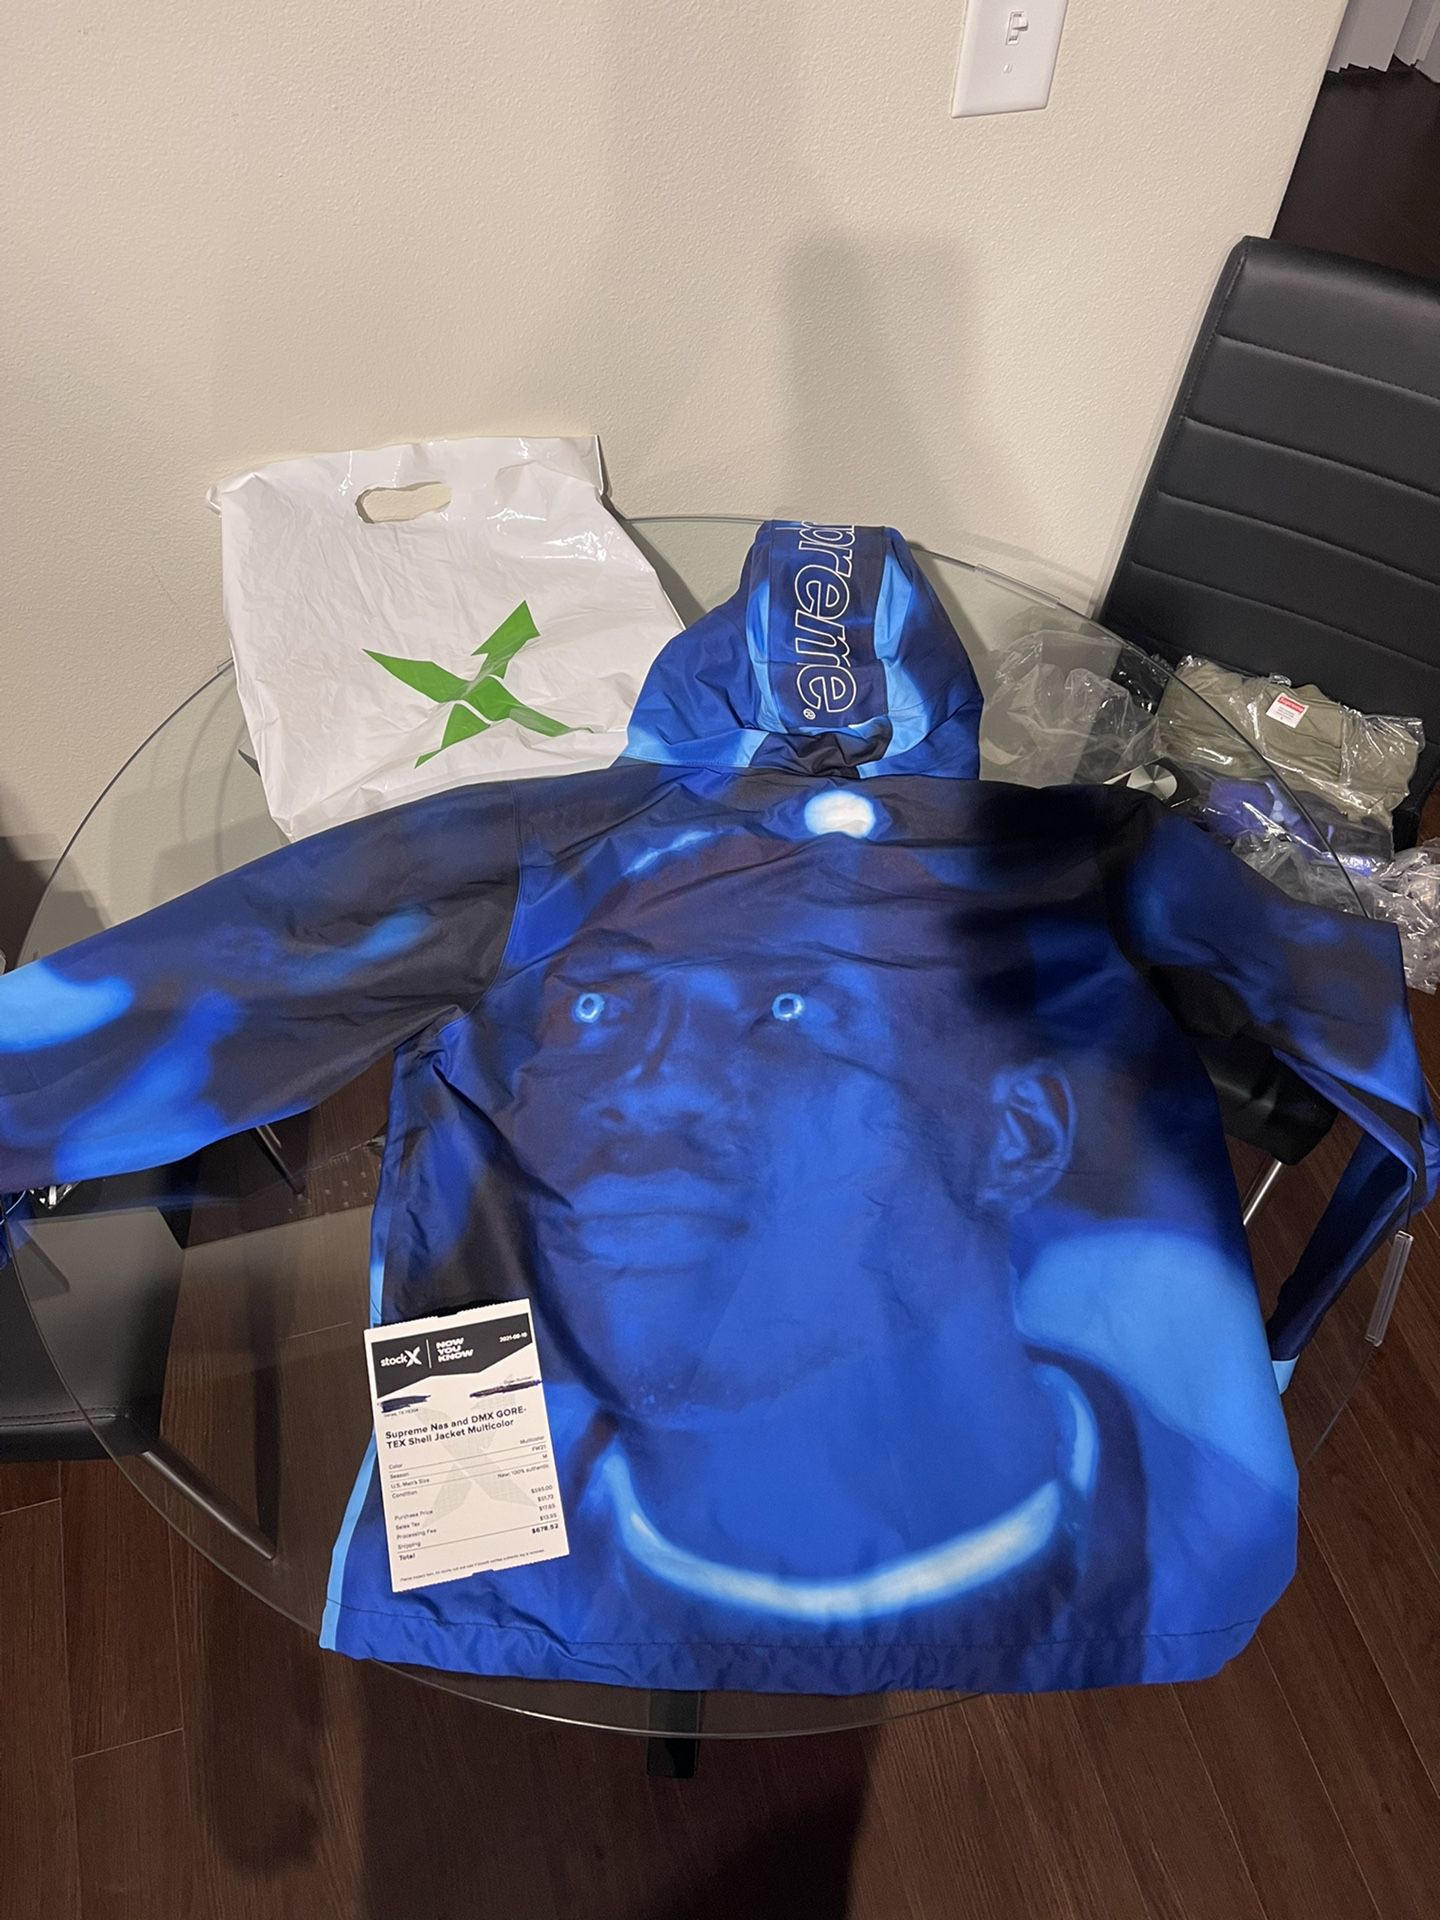 Dmx / Nas Belly Supreme Jacket And Tee